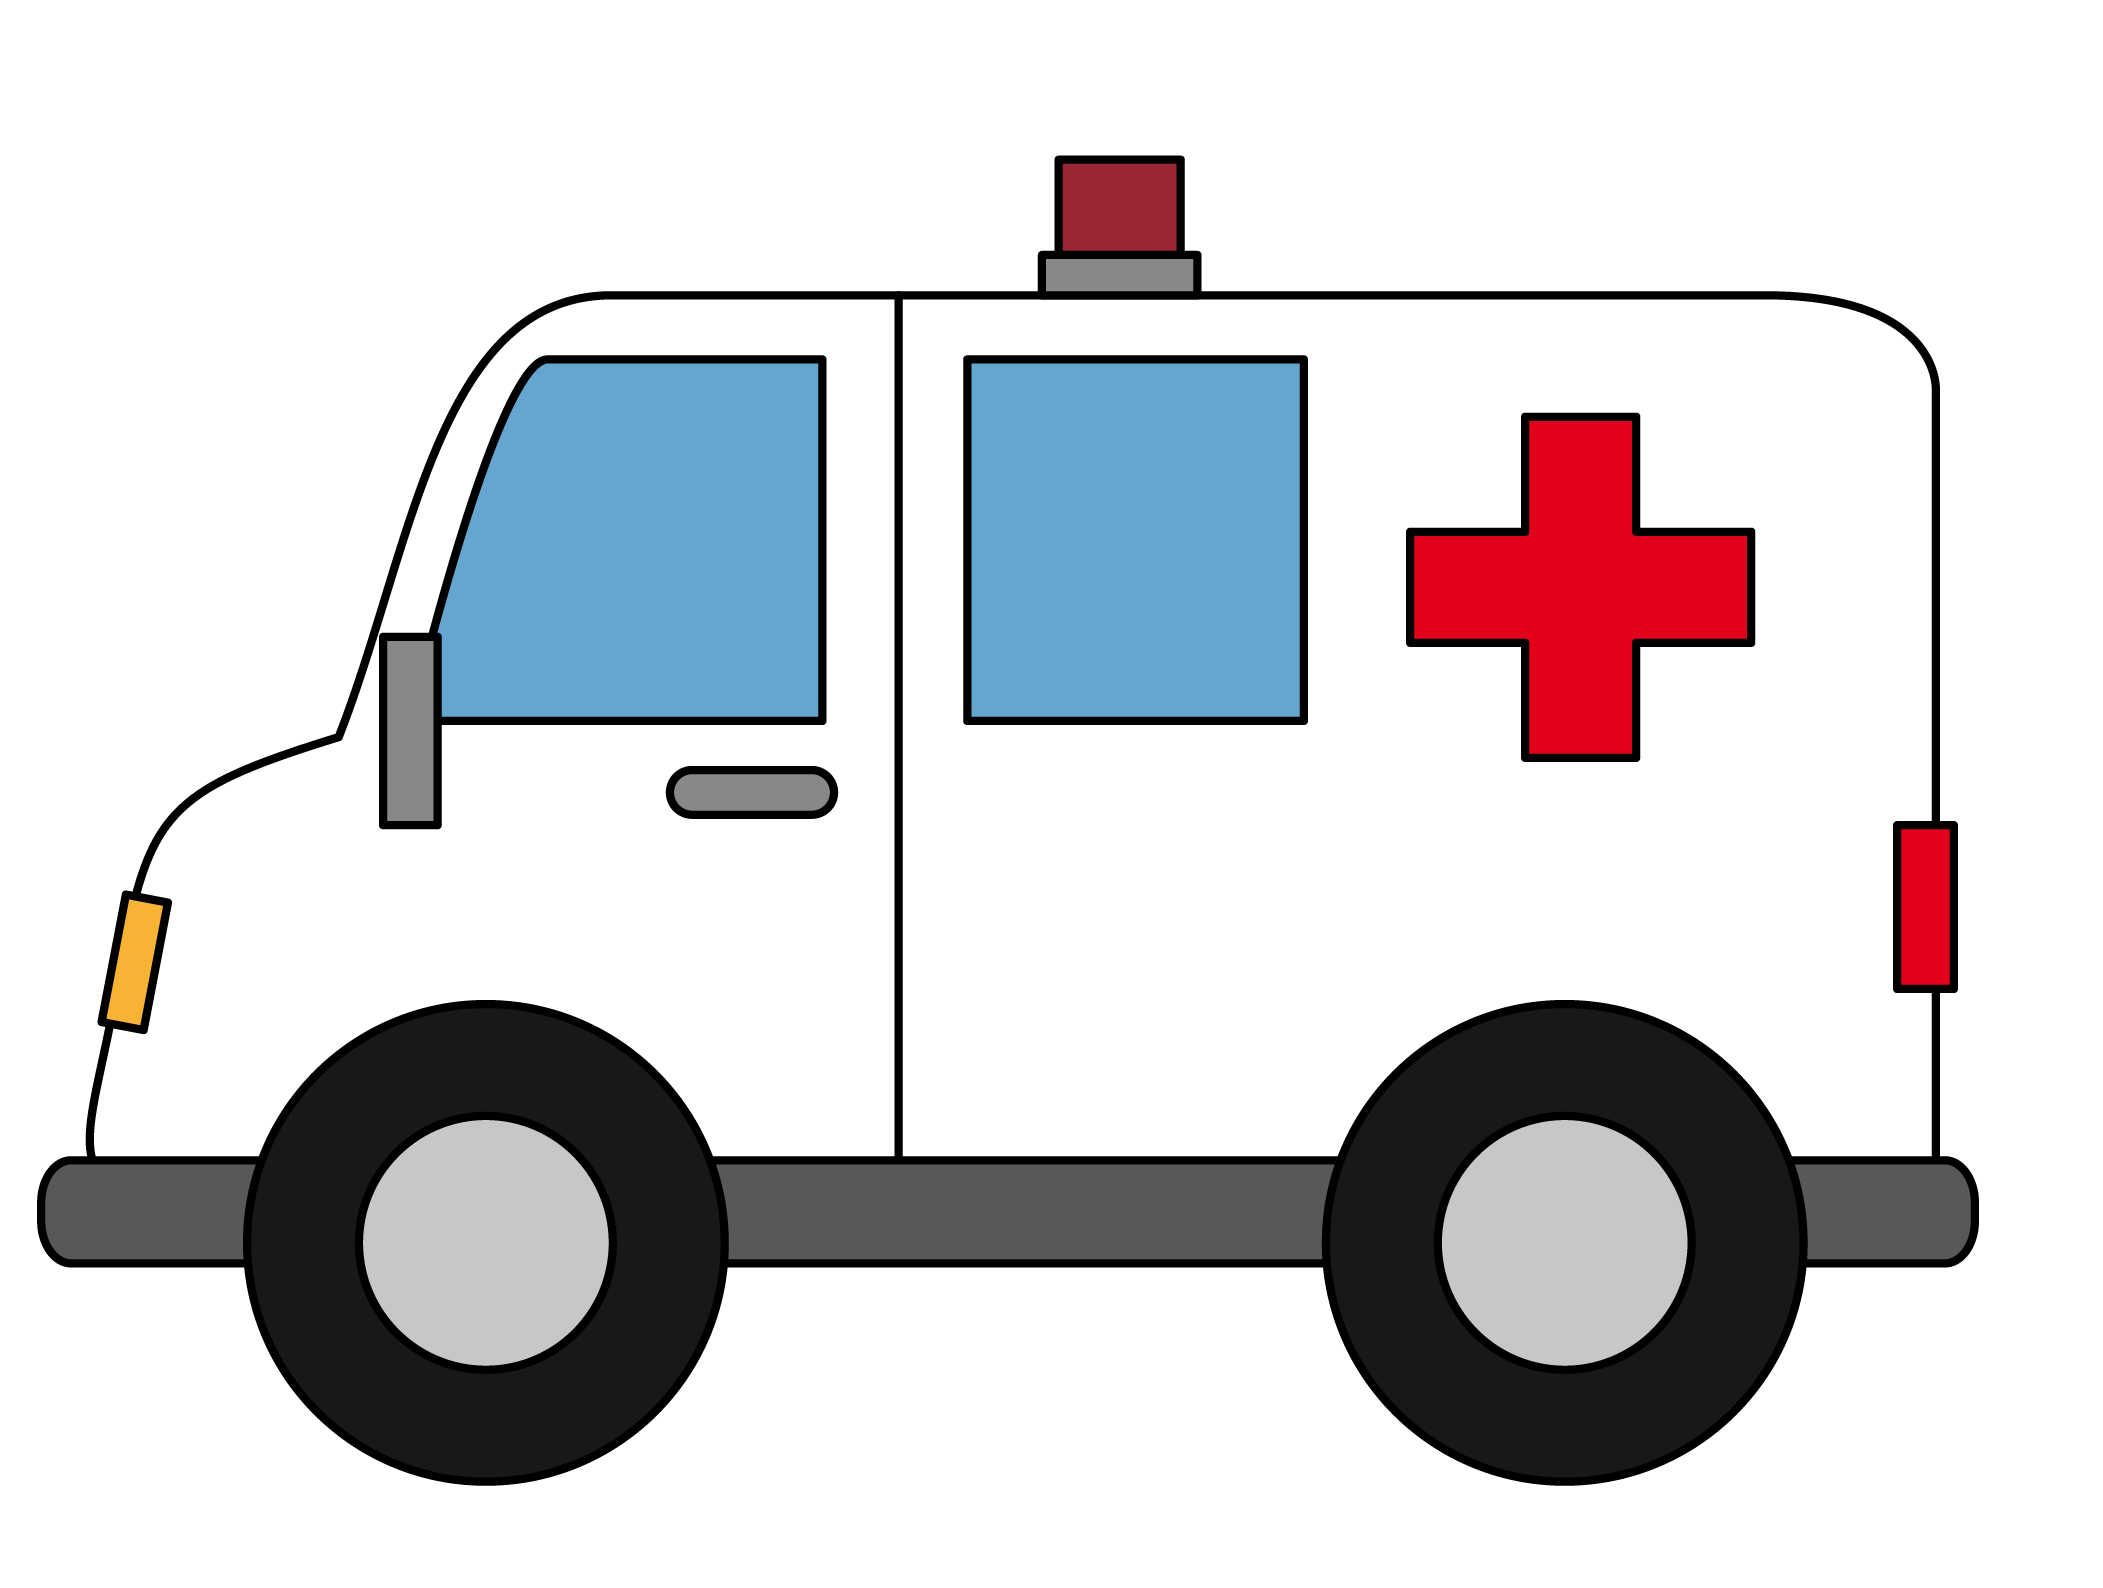 Emergency Vehicle Card Clip Art Free - ClipArt Best